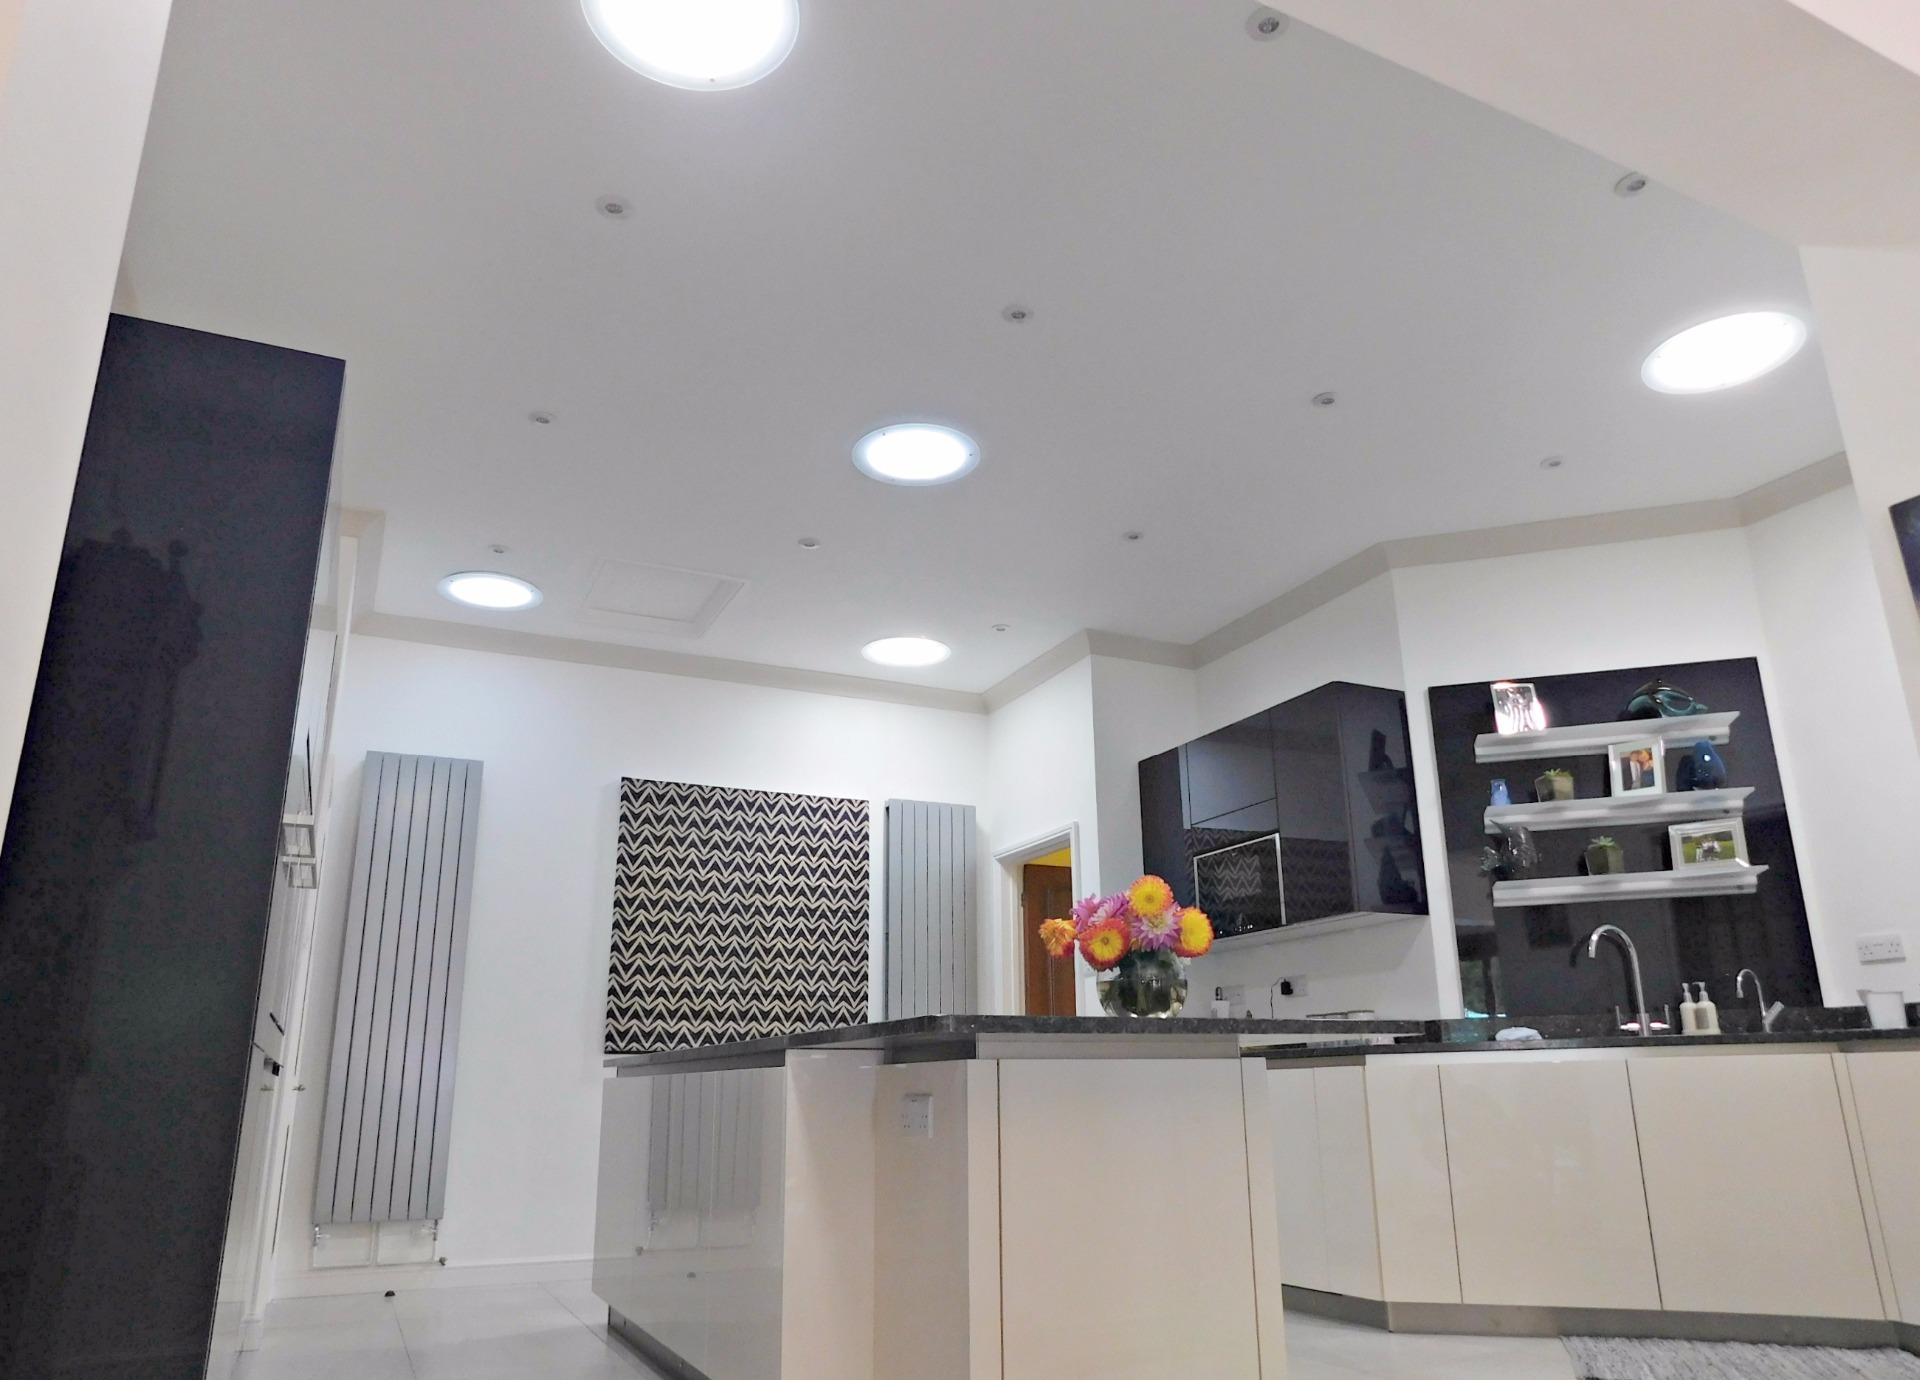 After the kitchen was built with 5 daylighting systems